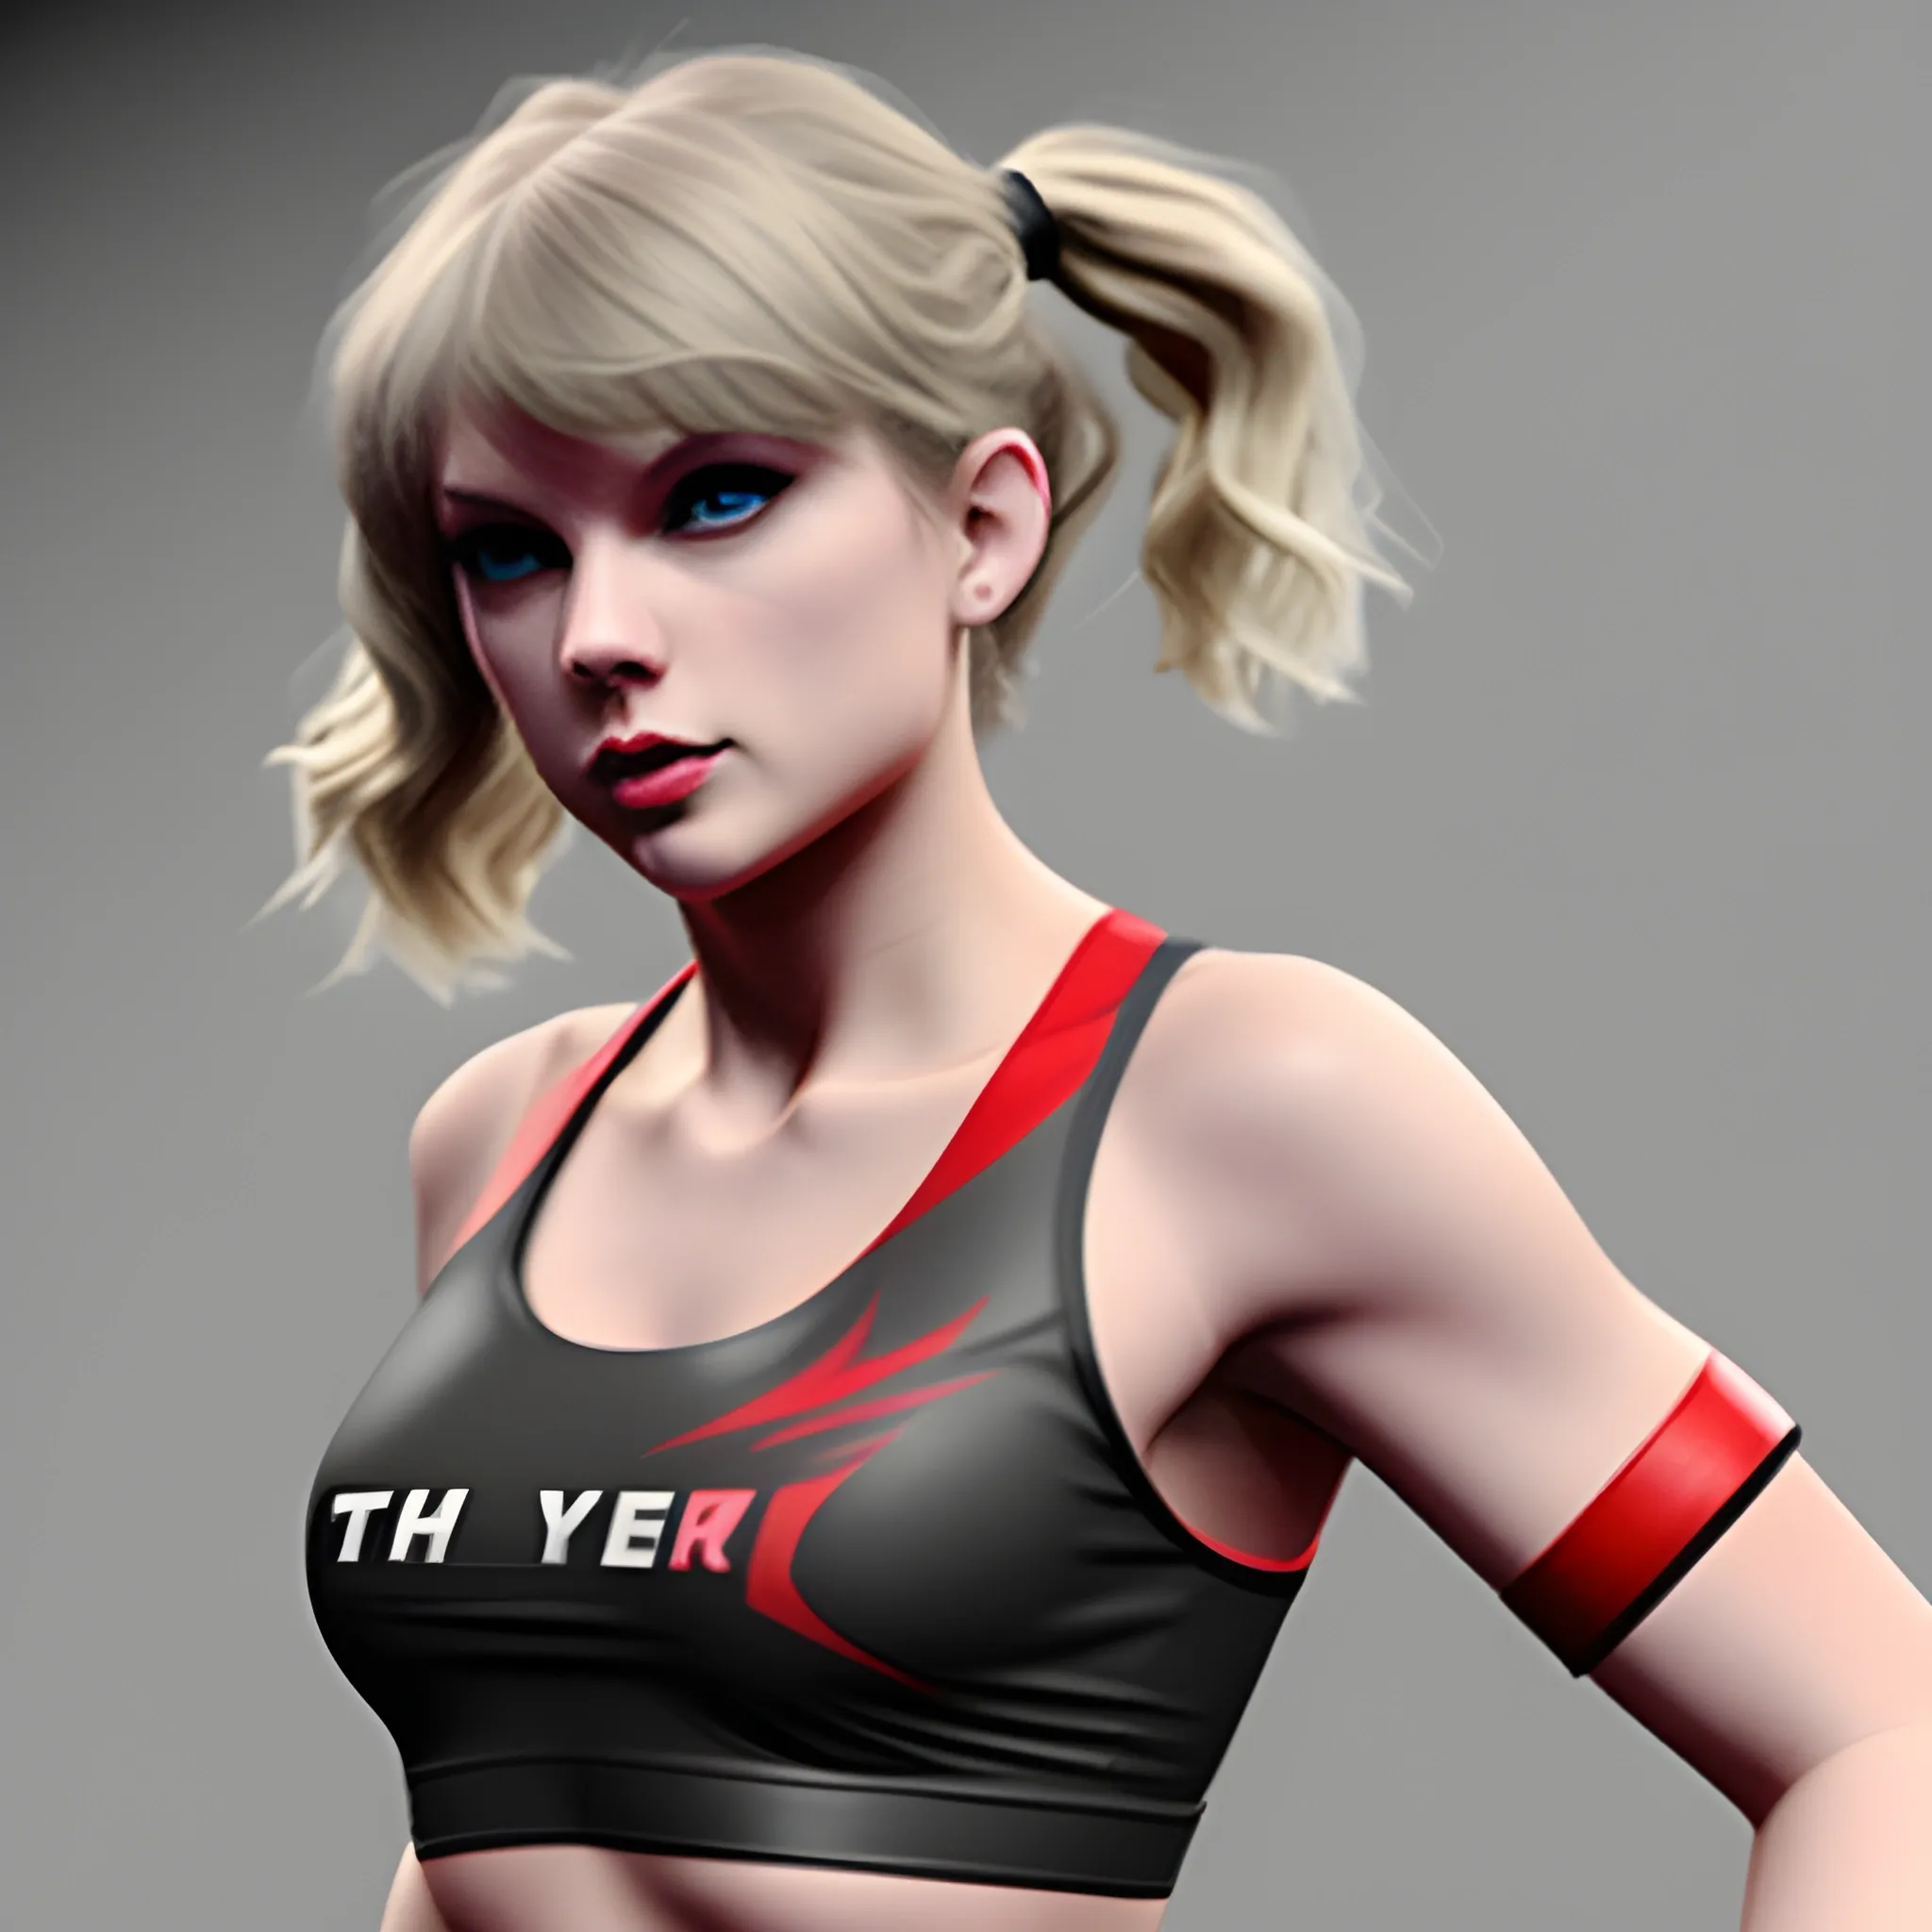 Taylor swift as an mma fighter , 3D